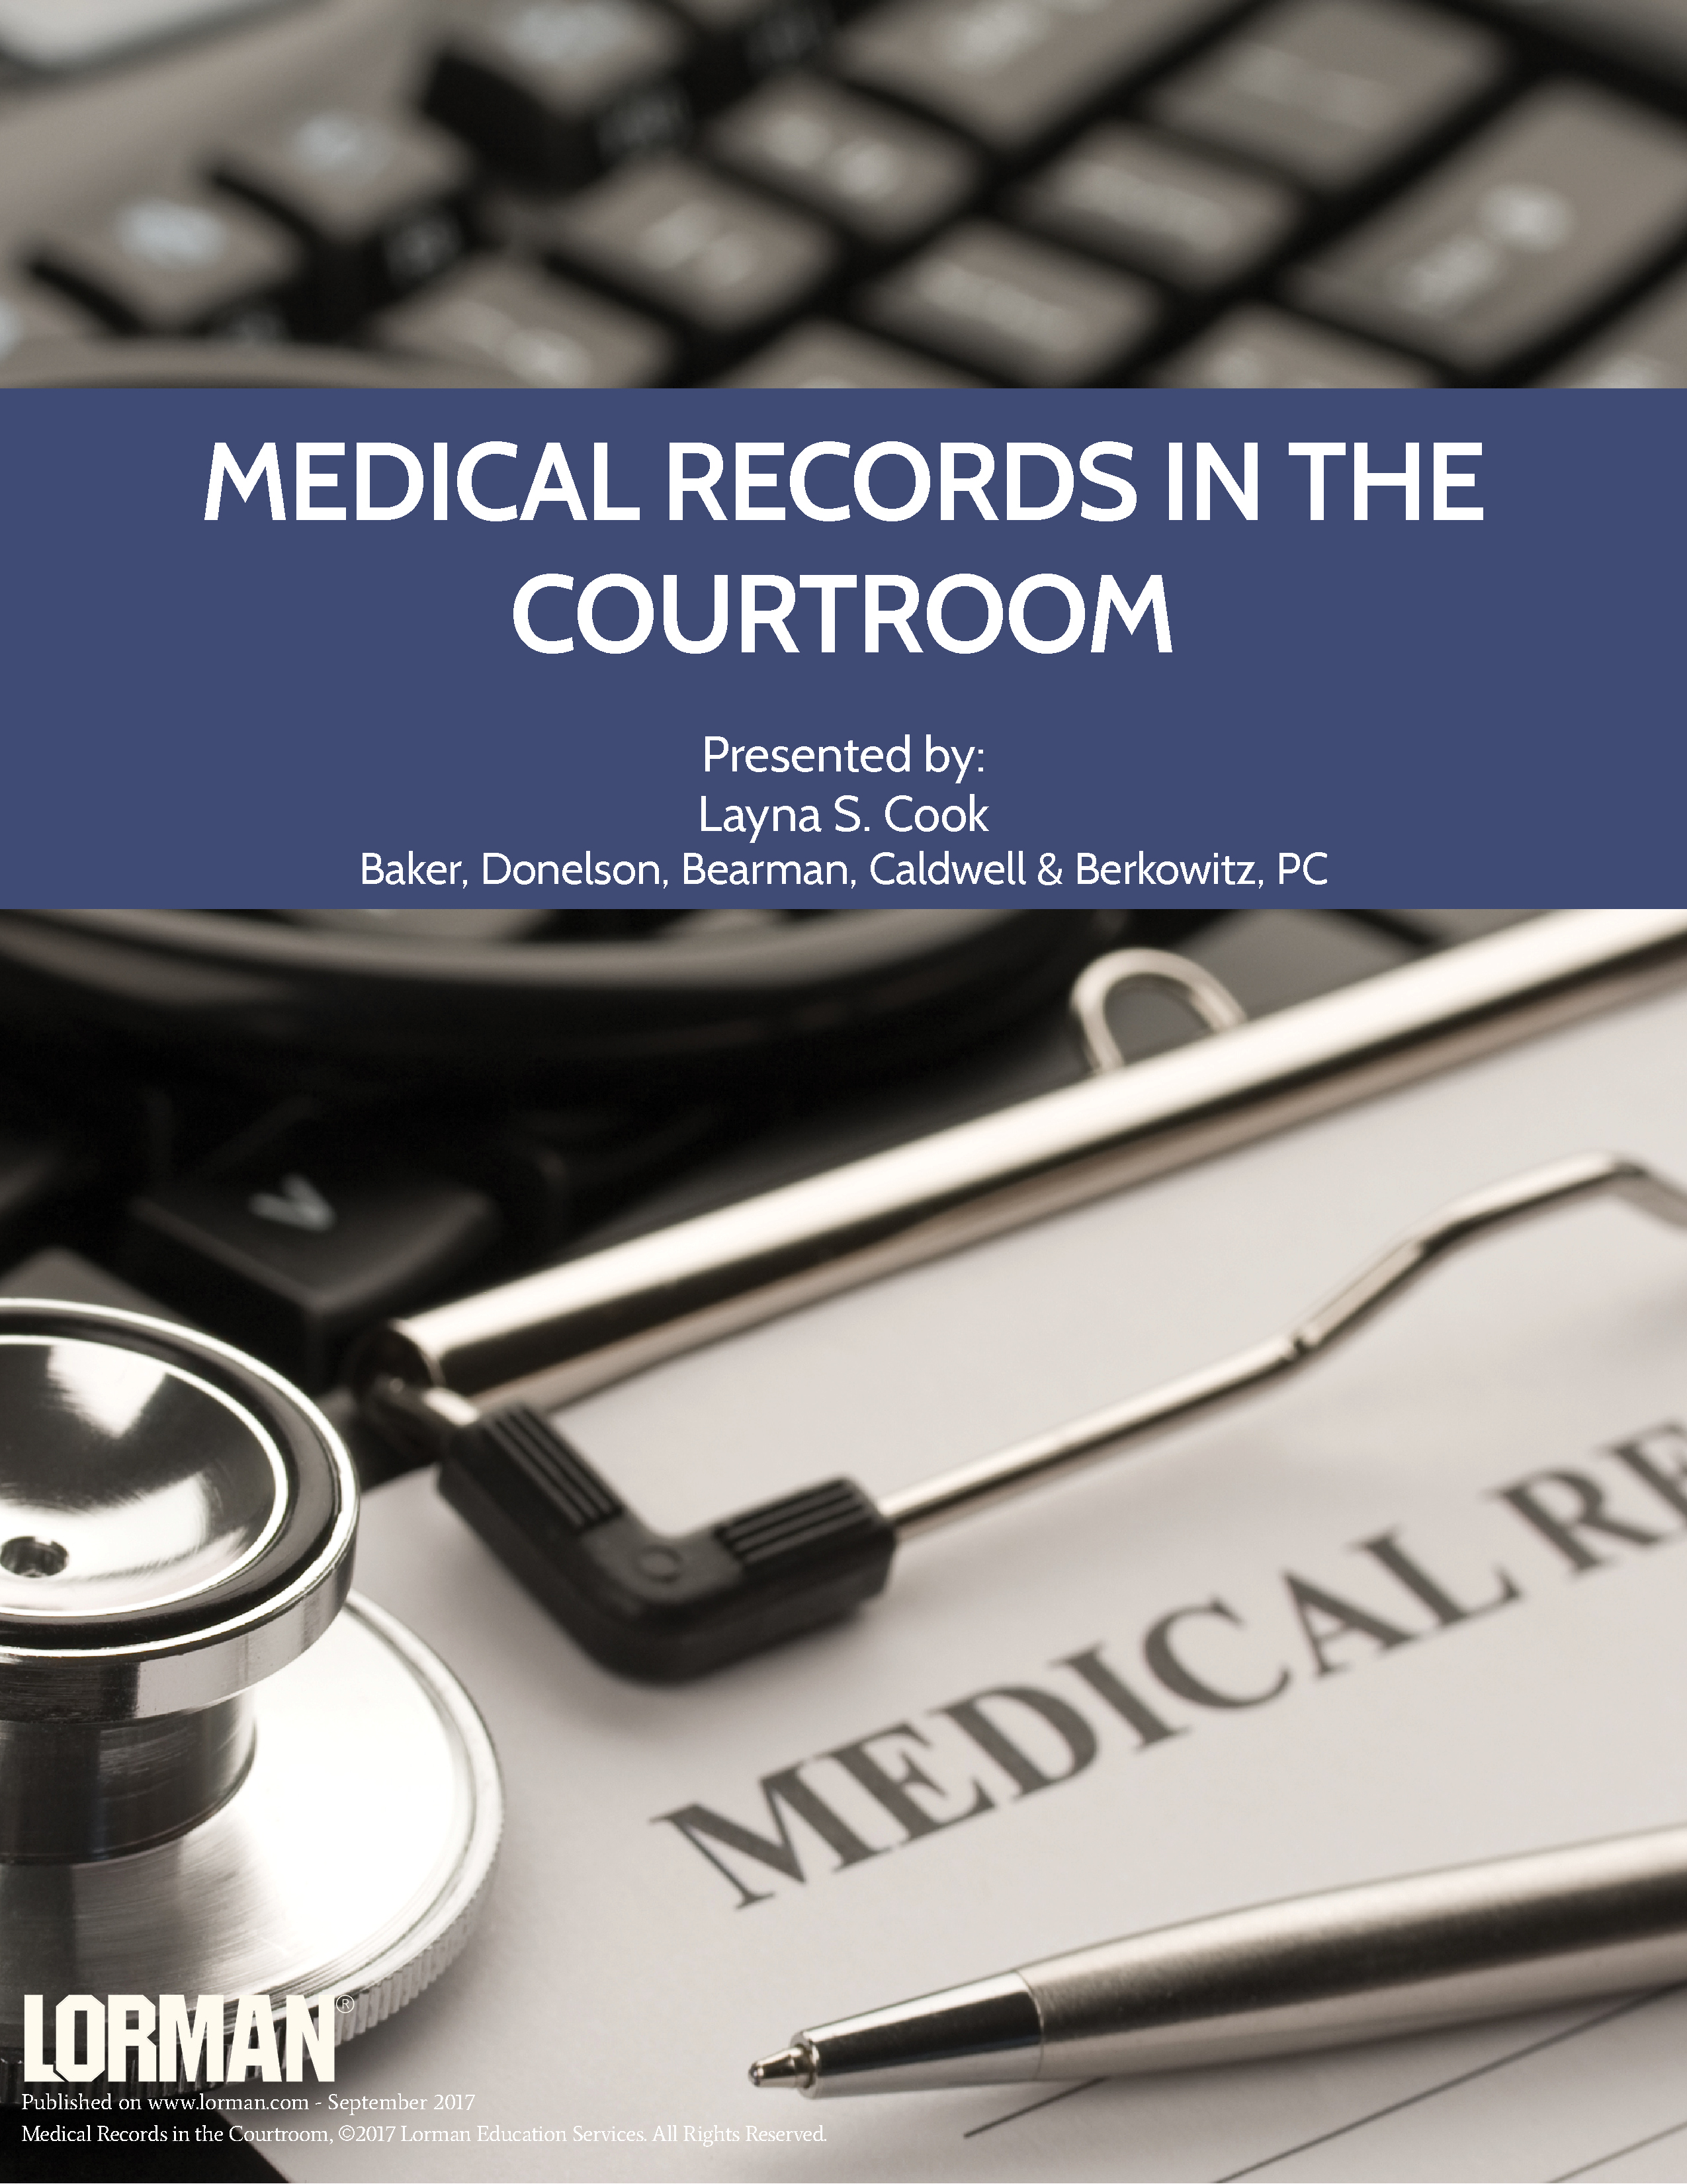 Medical Records in the Courtroom